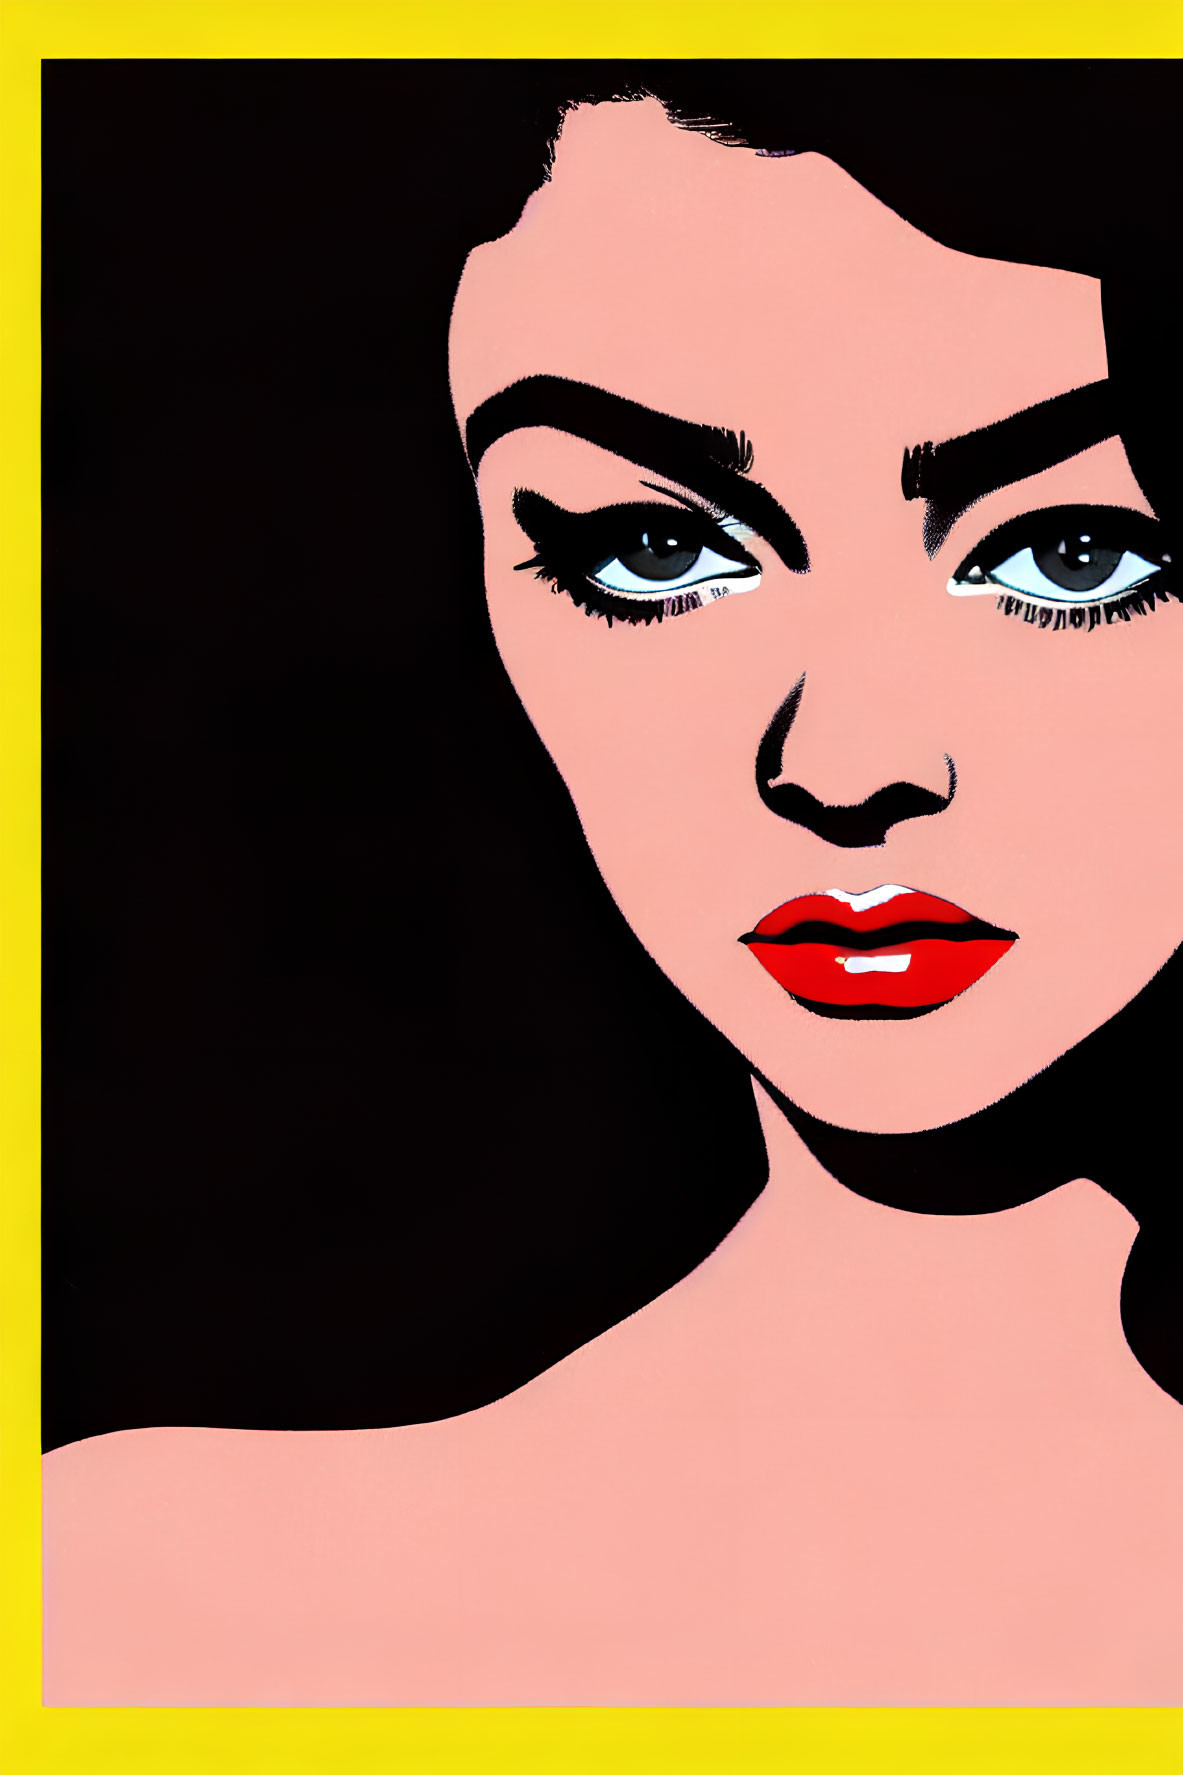 Vibrant pop art portrait of a woman with black hair and red lipstick